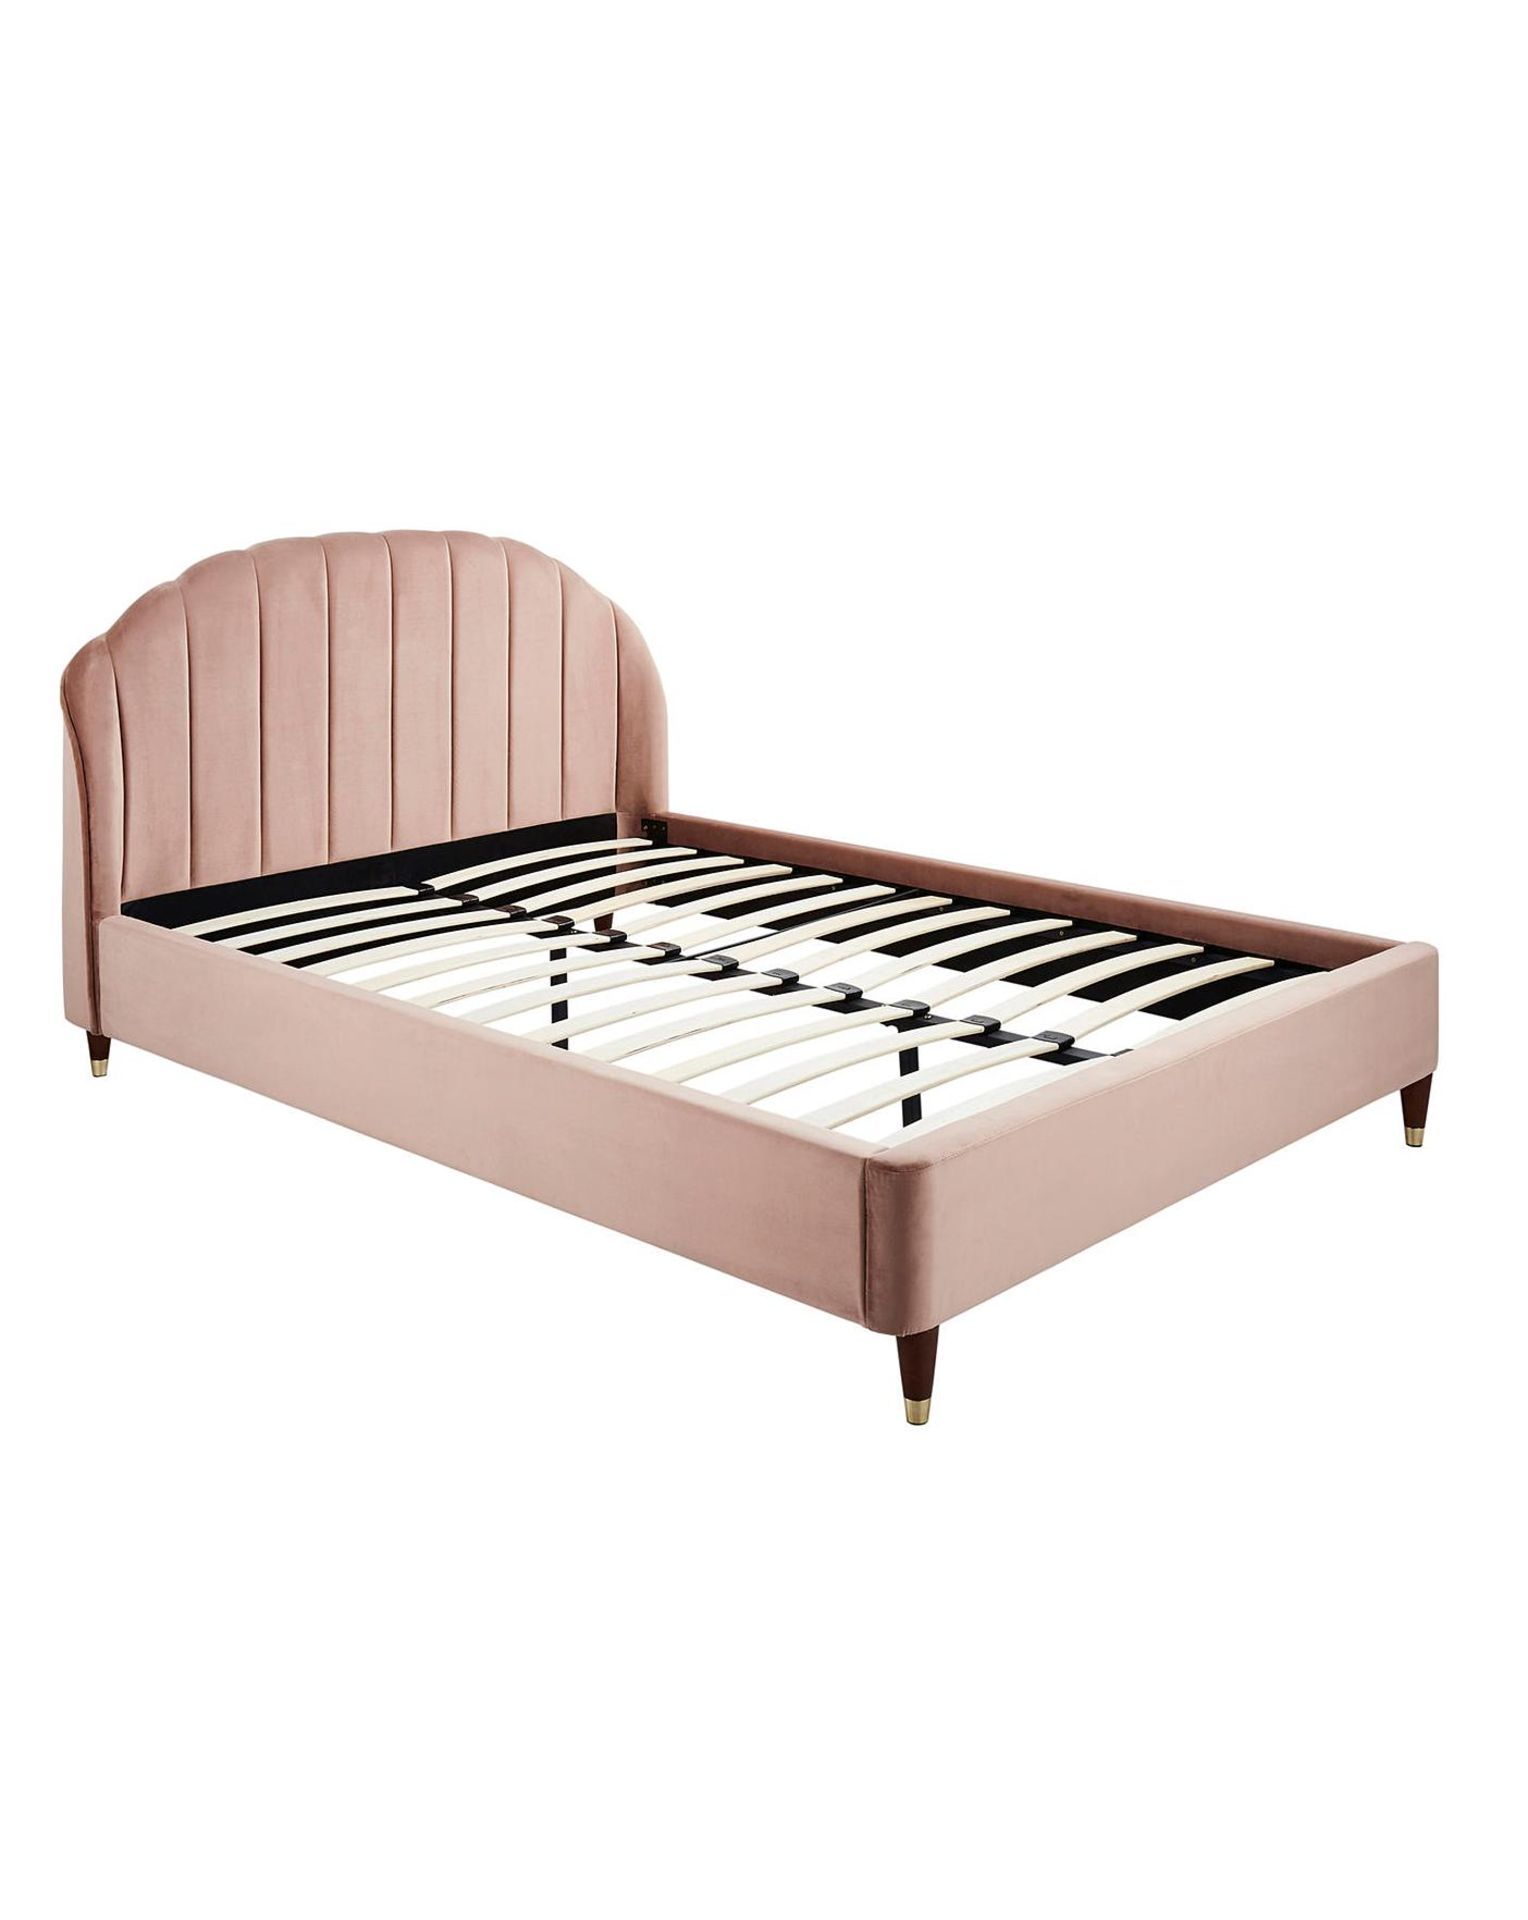 BRAND NEW ARDEN Quilted DOUBLE Bed Frame. BLUSH. RRP £339 EACH. The Arden Quilted Bed is the perfect - Bild 2 aus 2